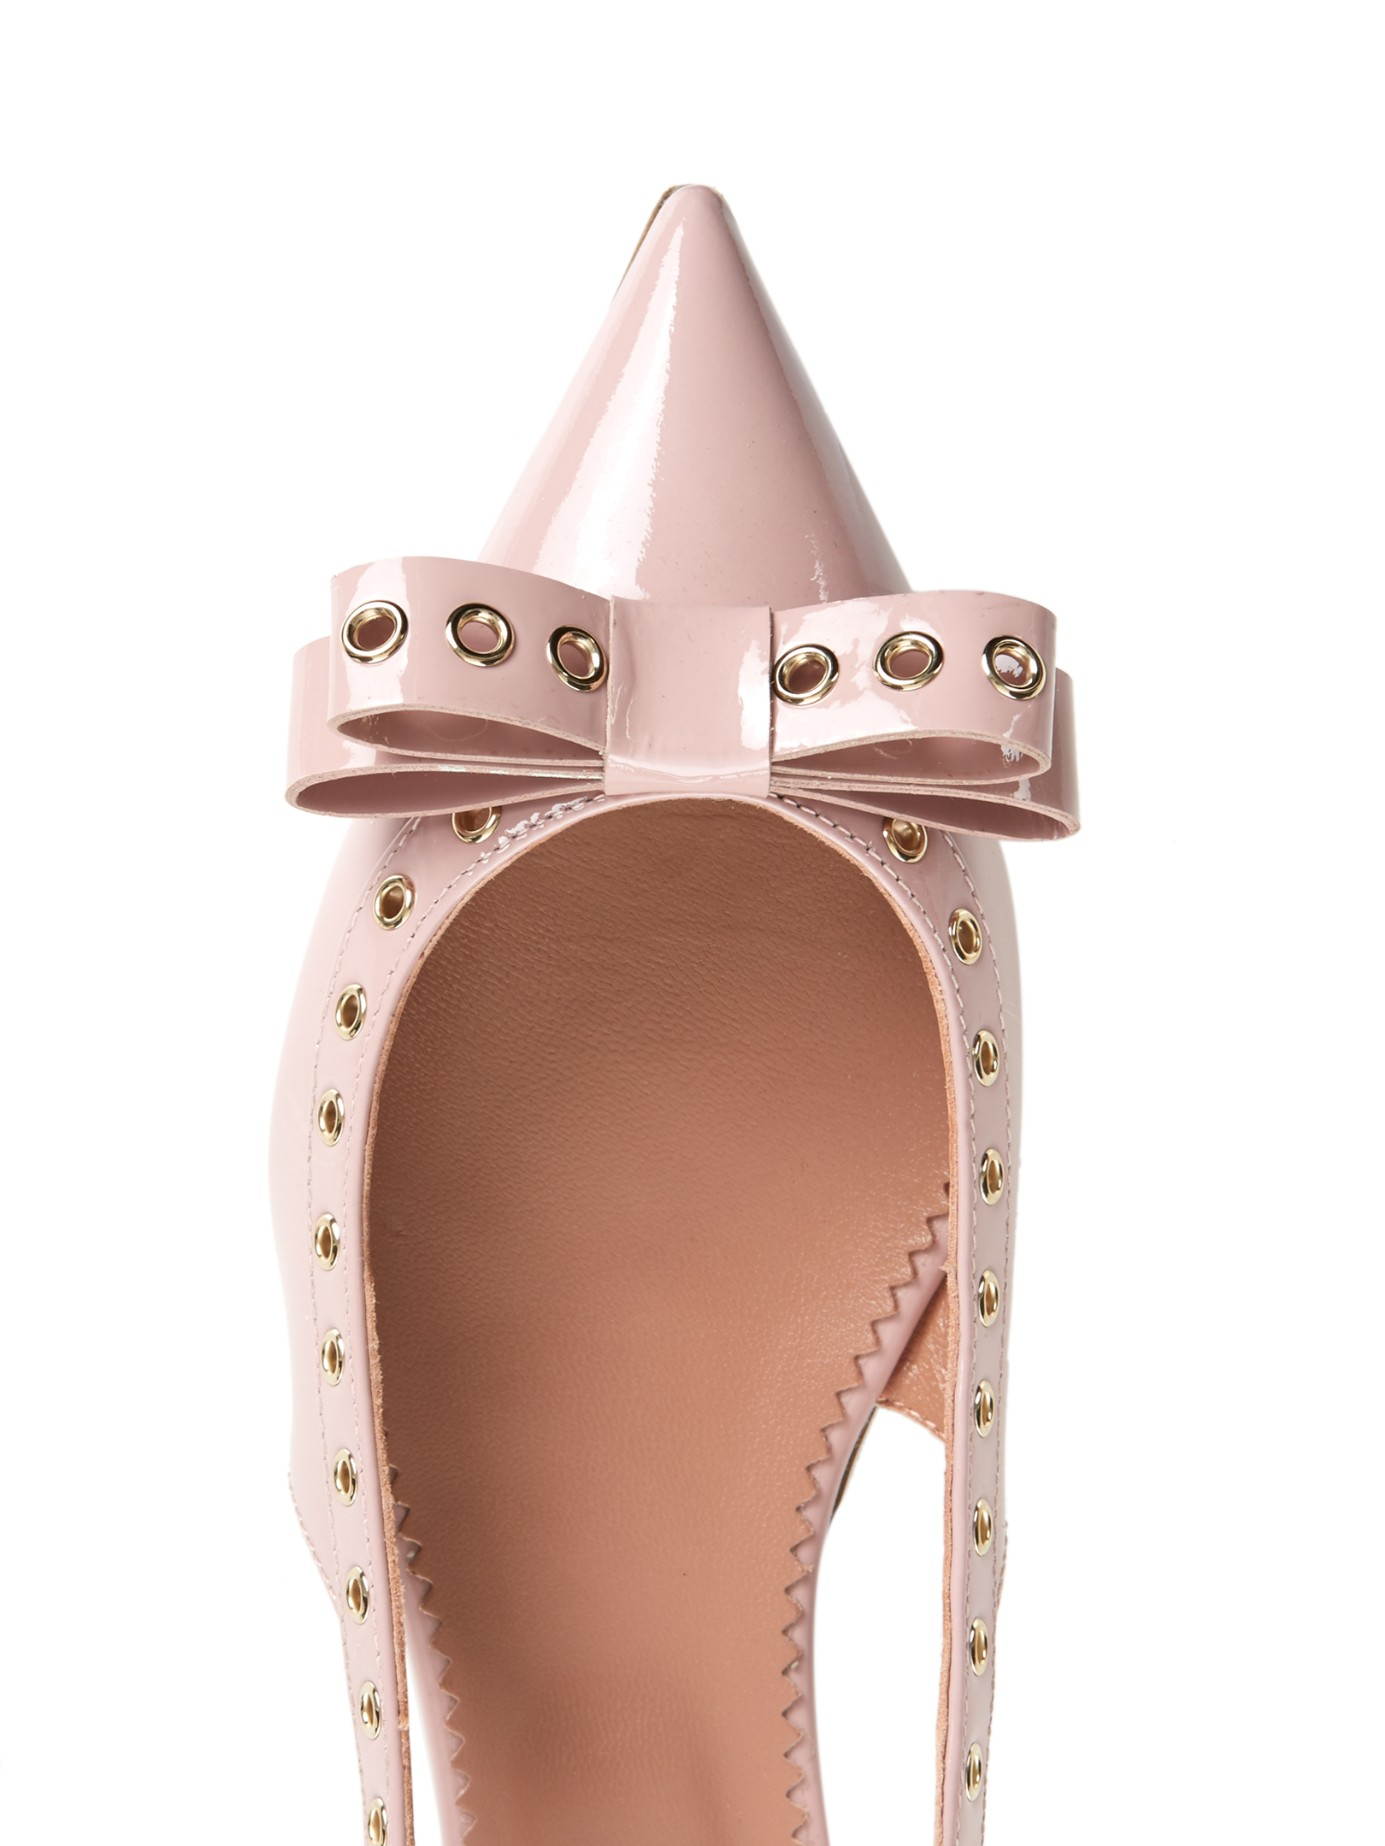 RED Valentino Bow-front Point-toe Flats in Pink - Lyst